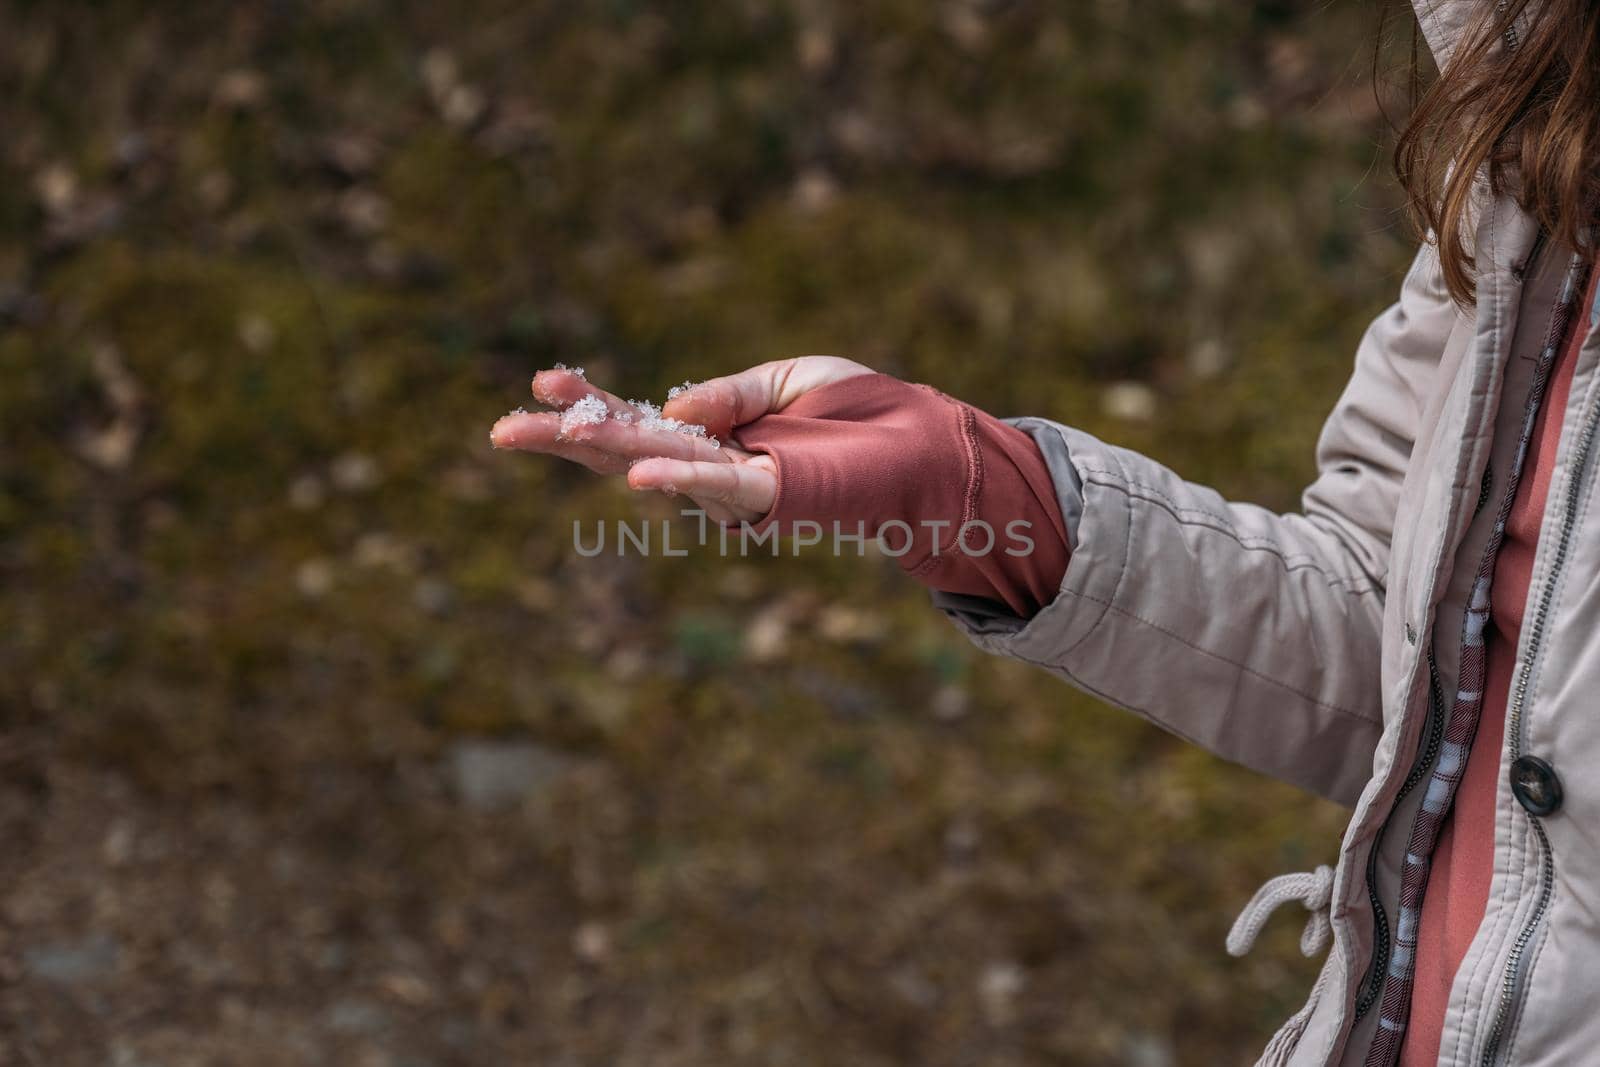 A woman wearing thumbhole jumper and holding melting snow in her hand during hiking in spring